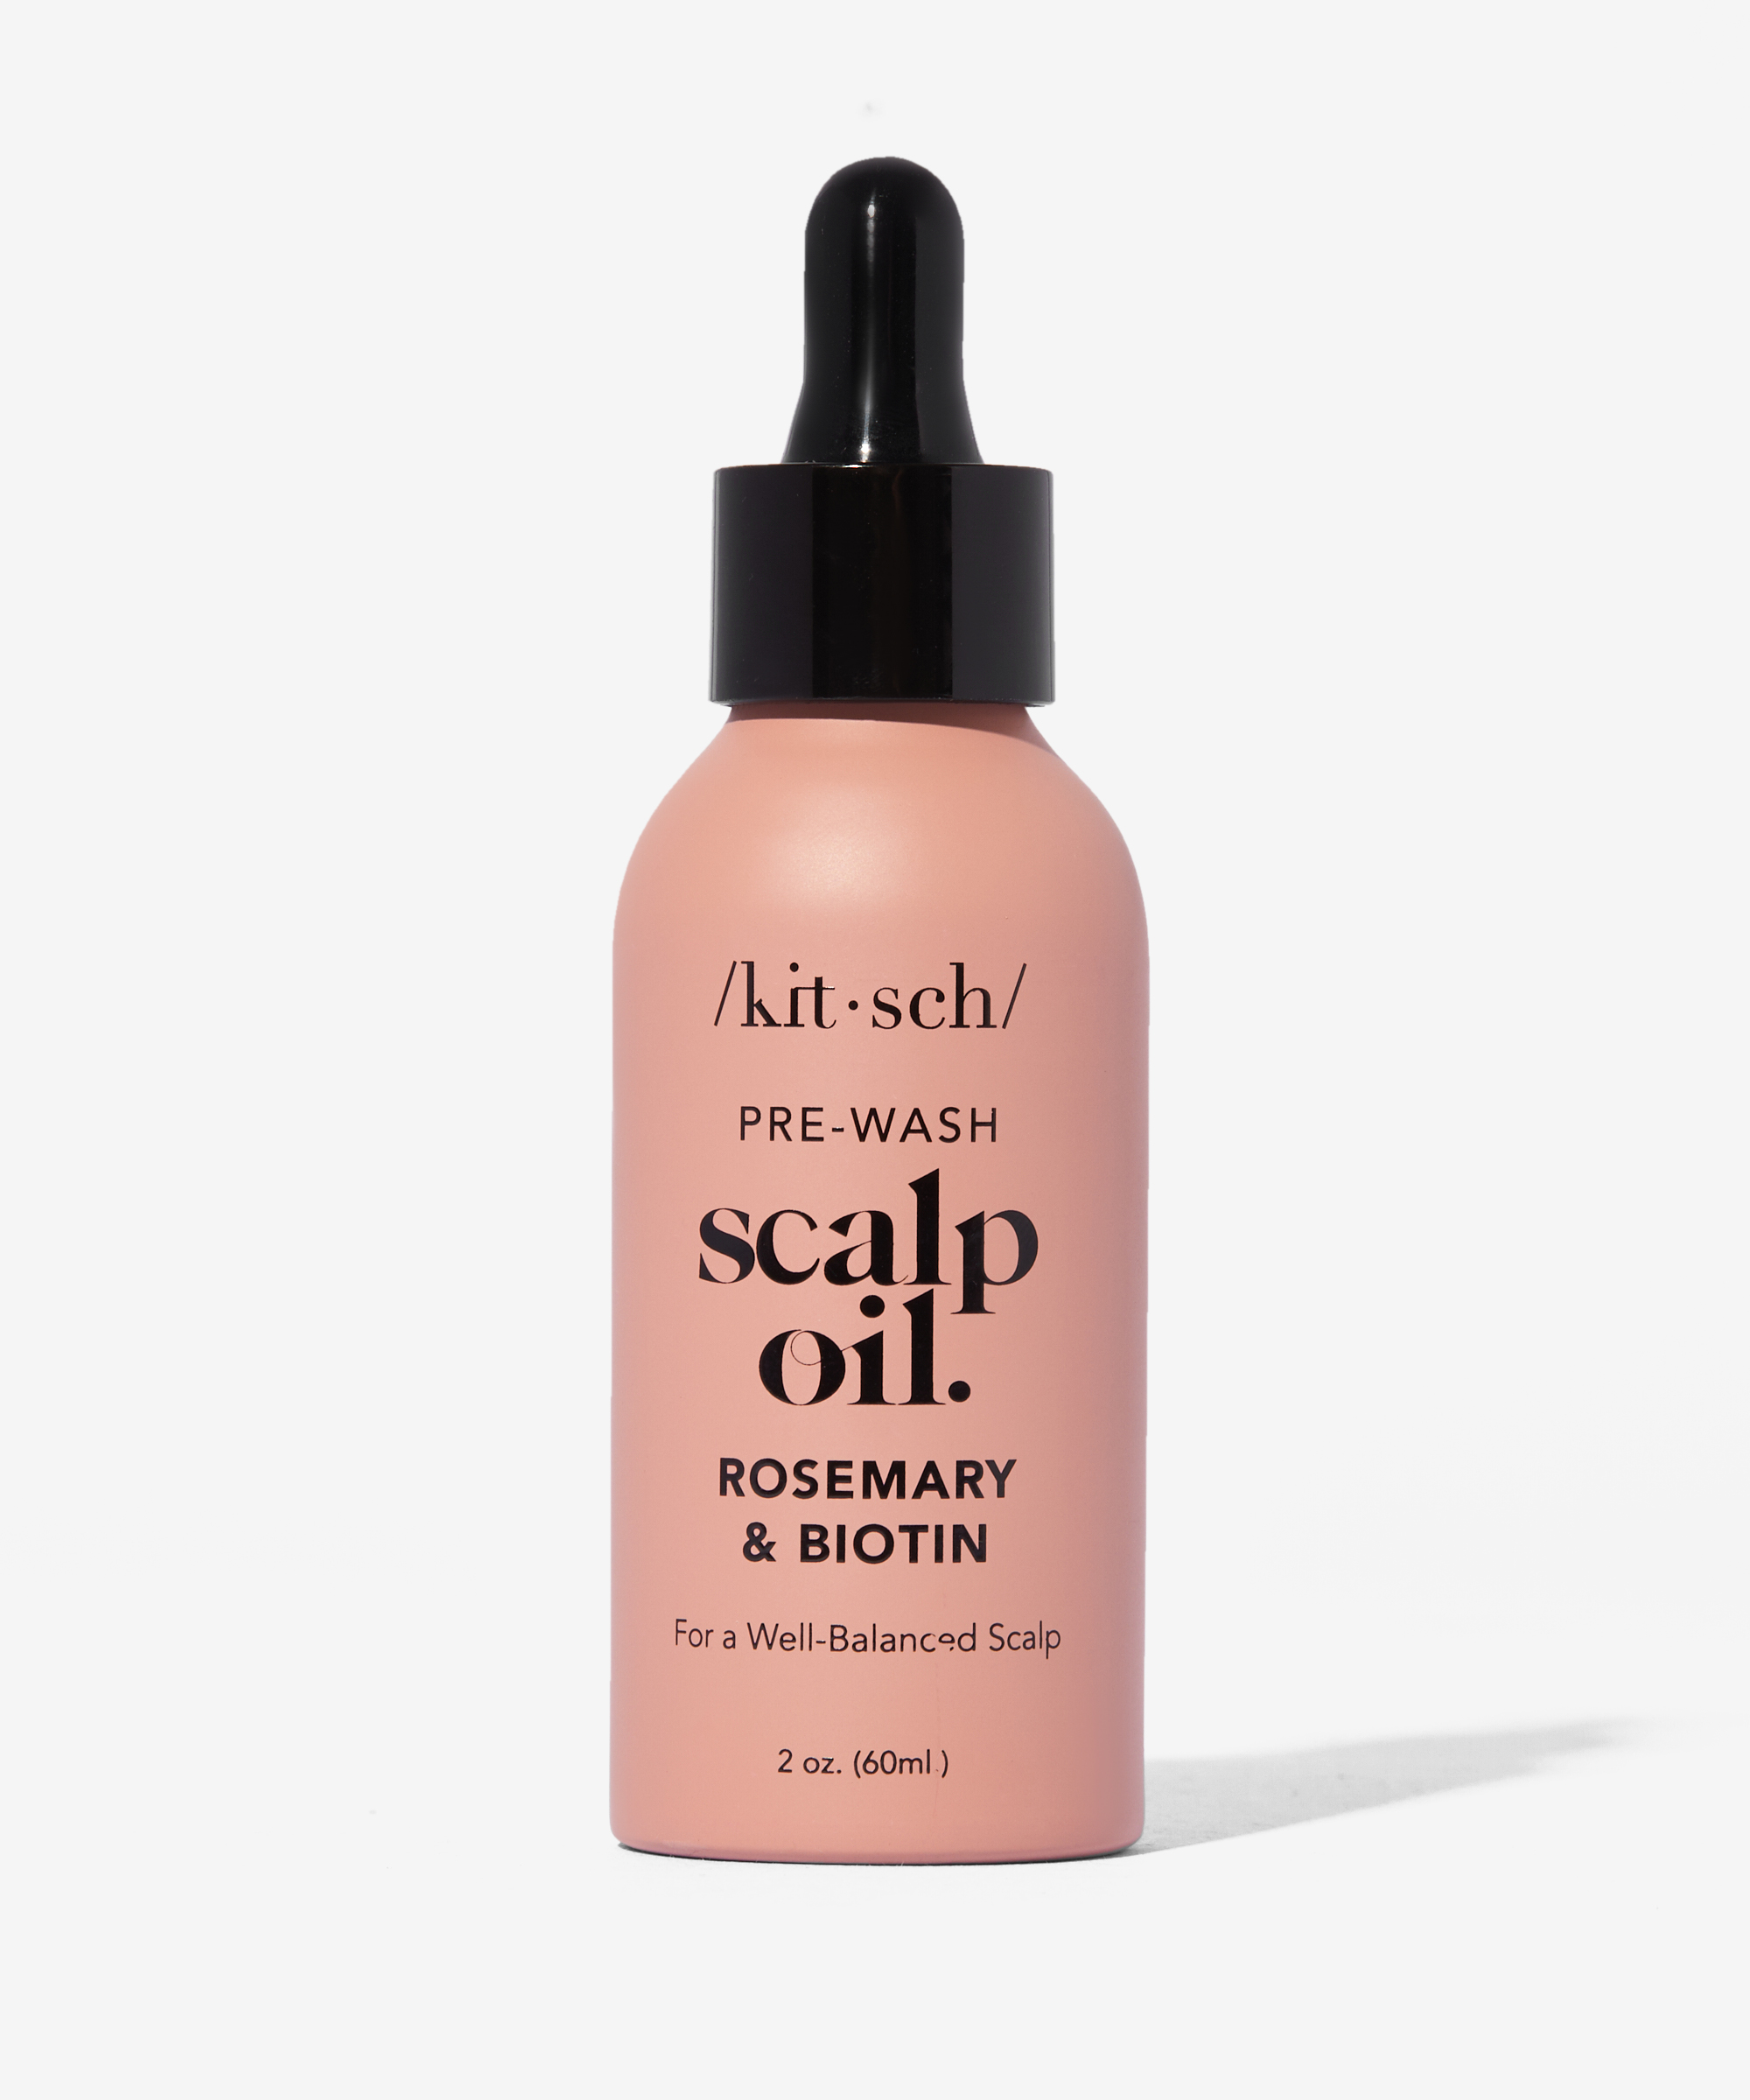 Kitsch Pre-Wash Scalp Oil with Rosemary & Biotin at BEAUTY BAY